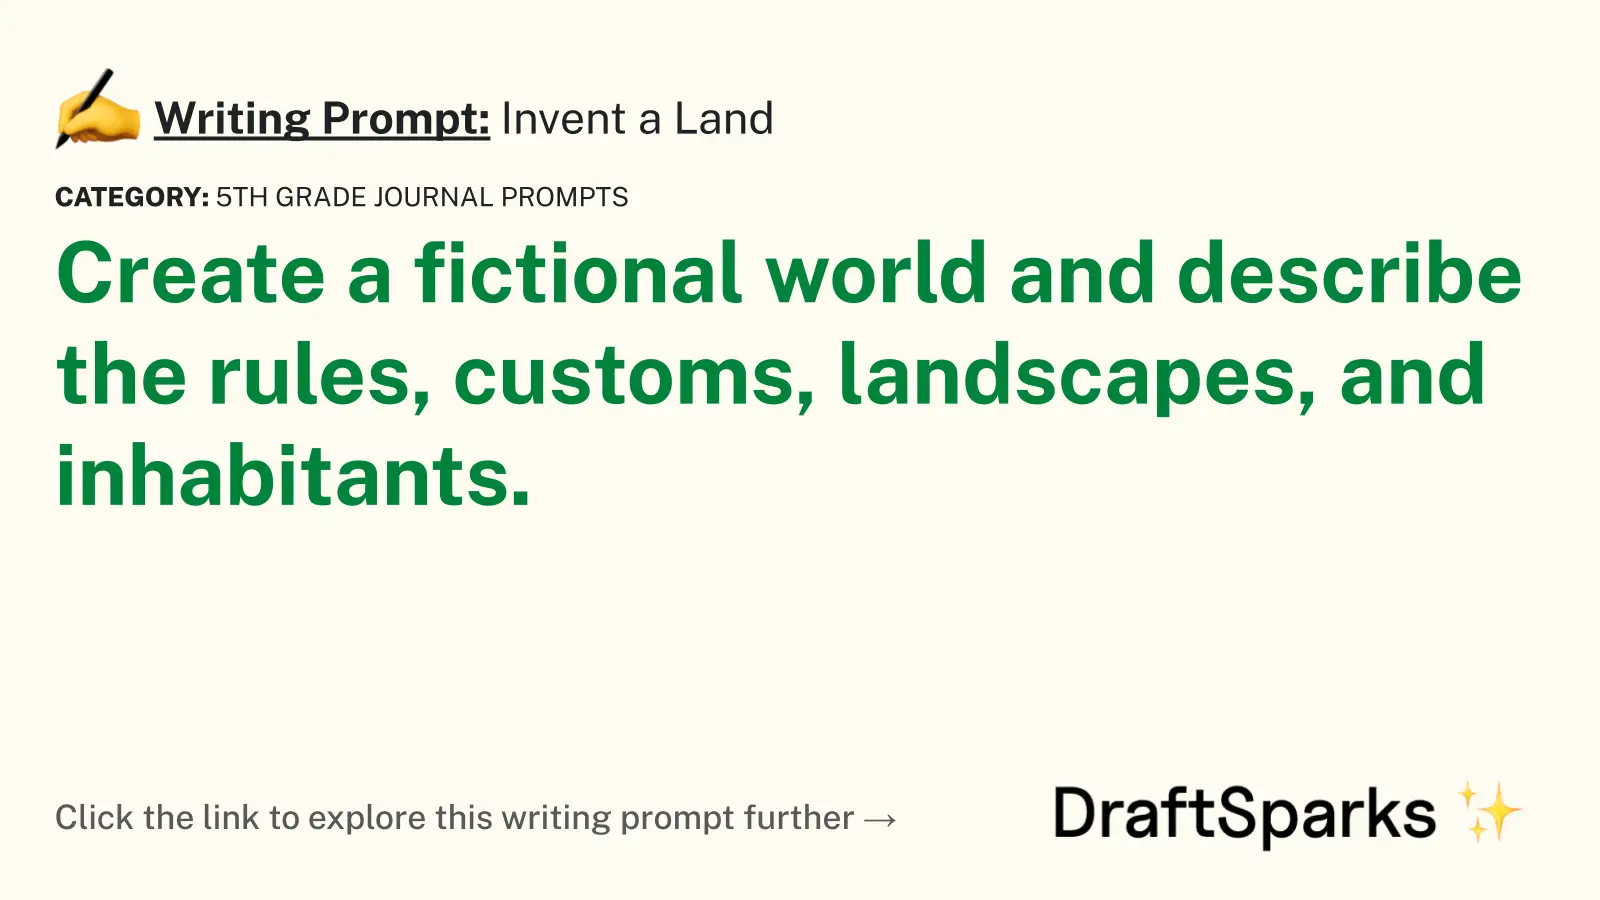 Invent a Land